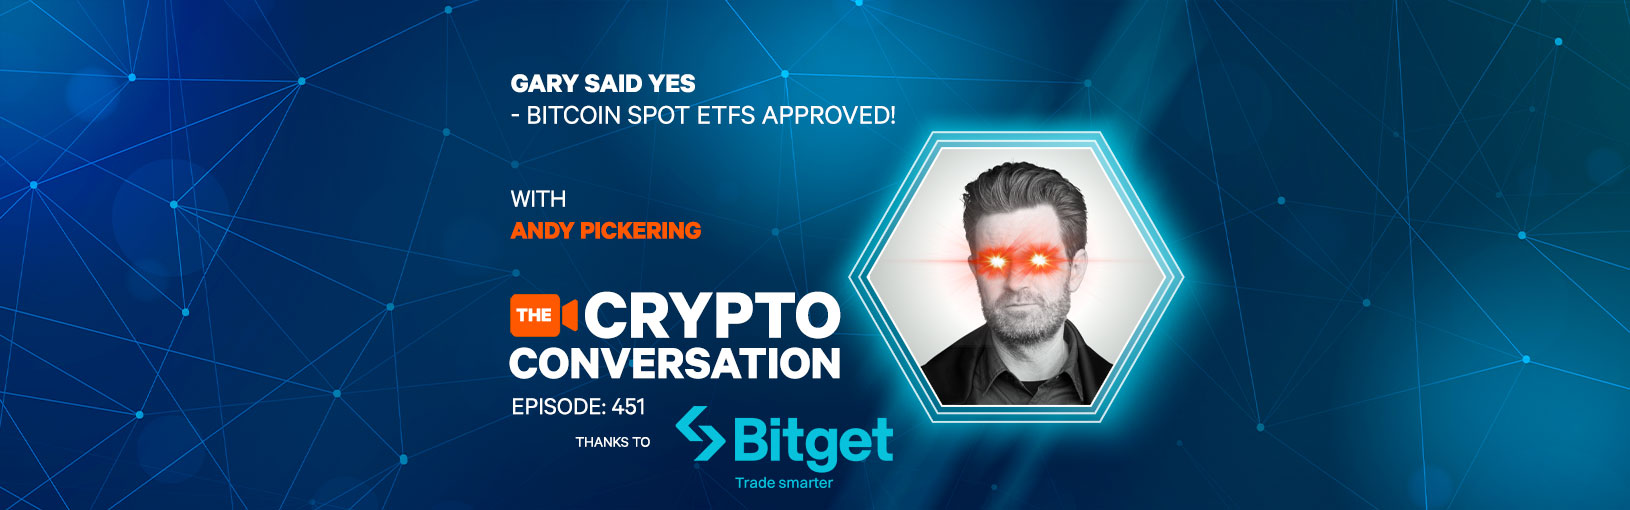 Gary Said Yes – Bitcoin Spot ETFs Approved!